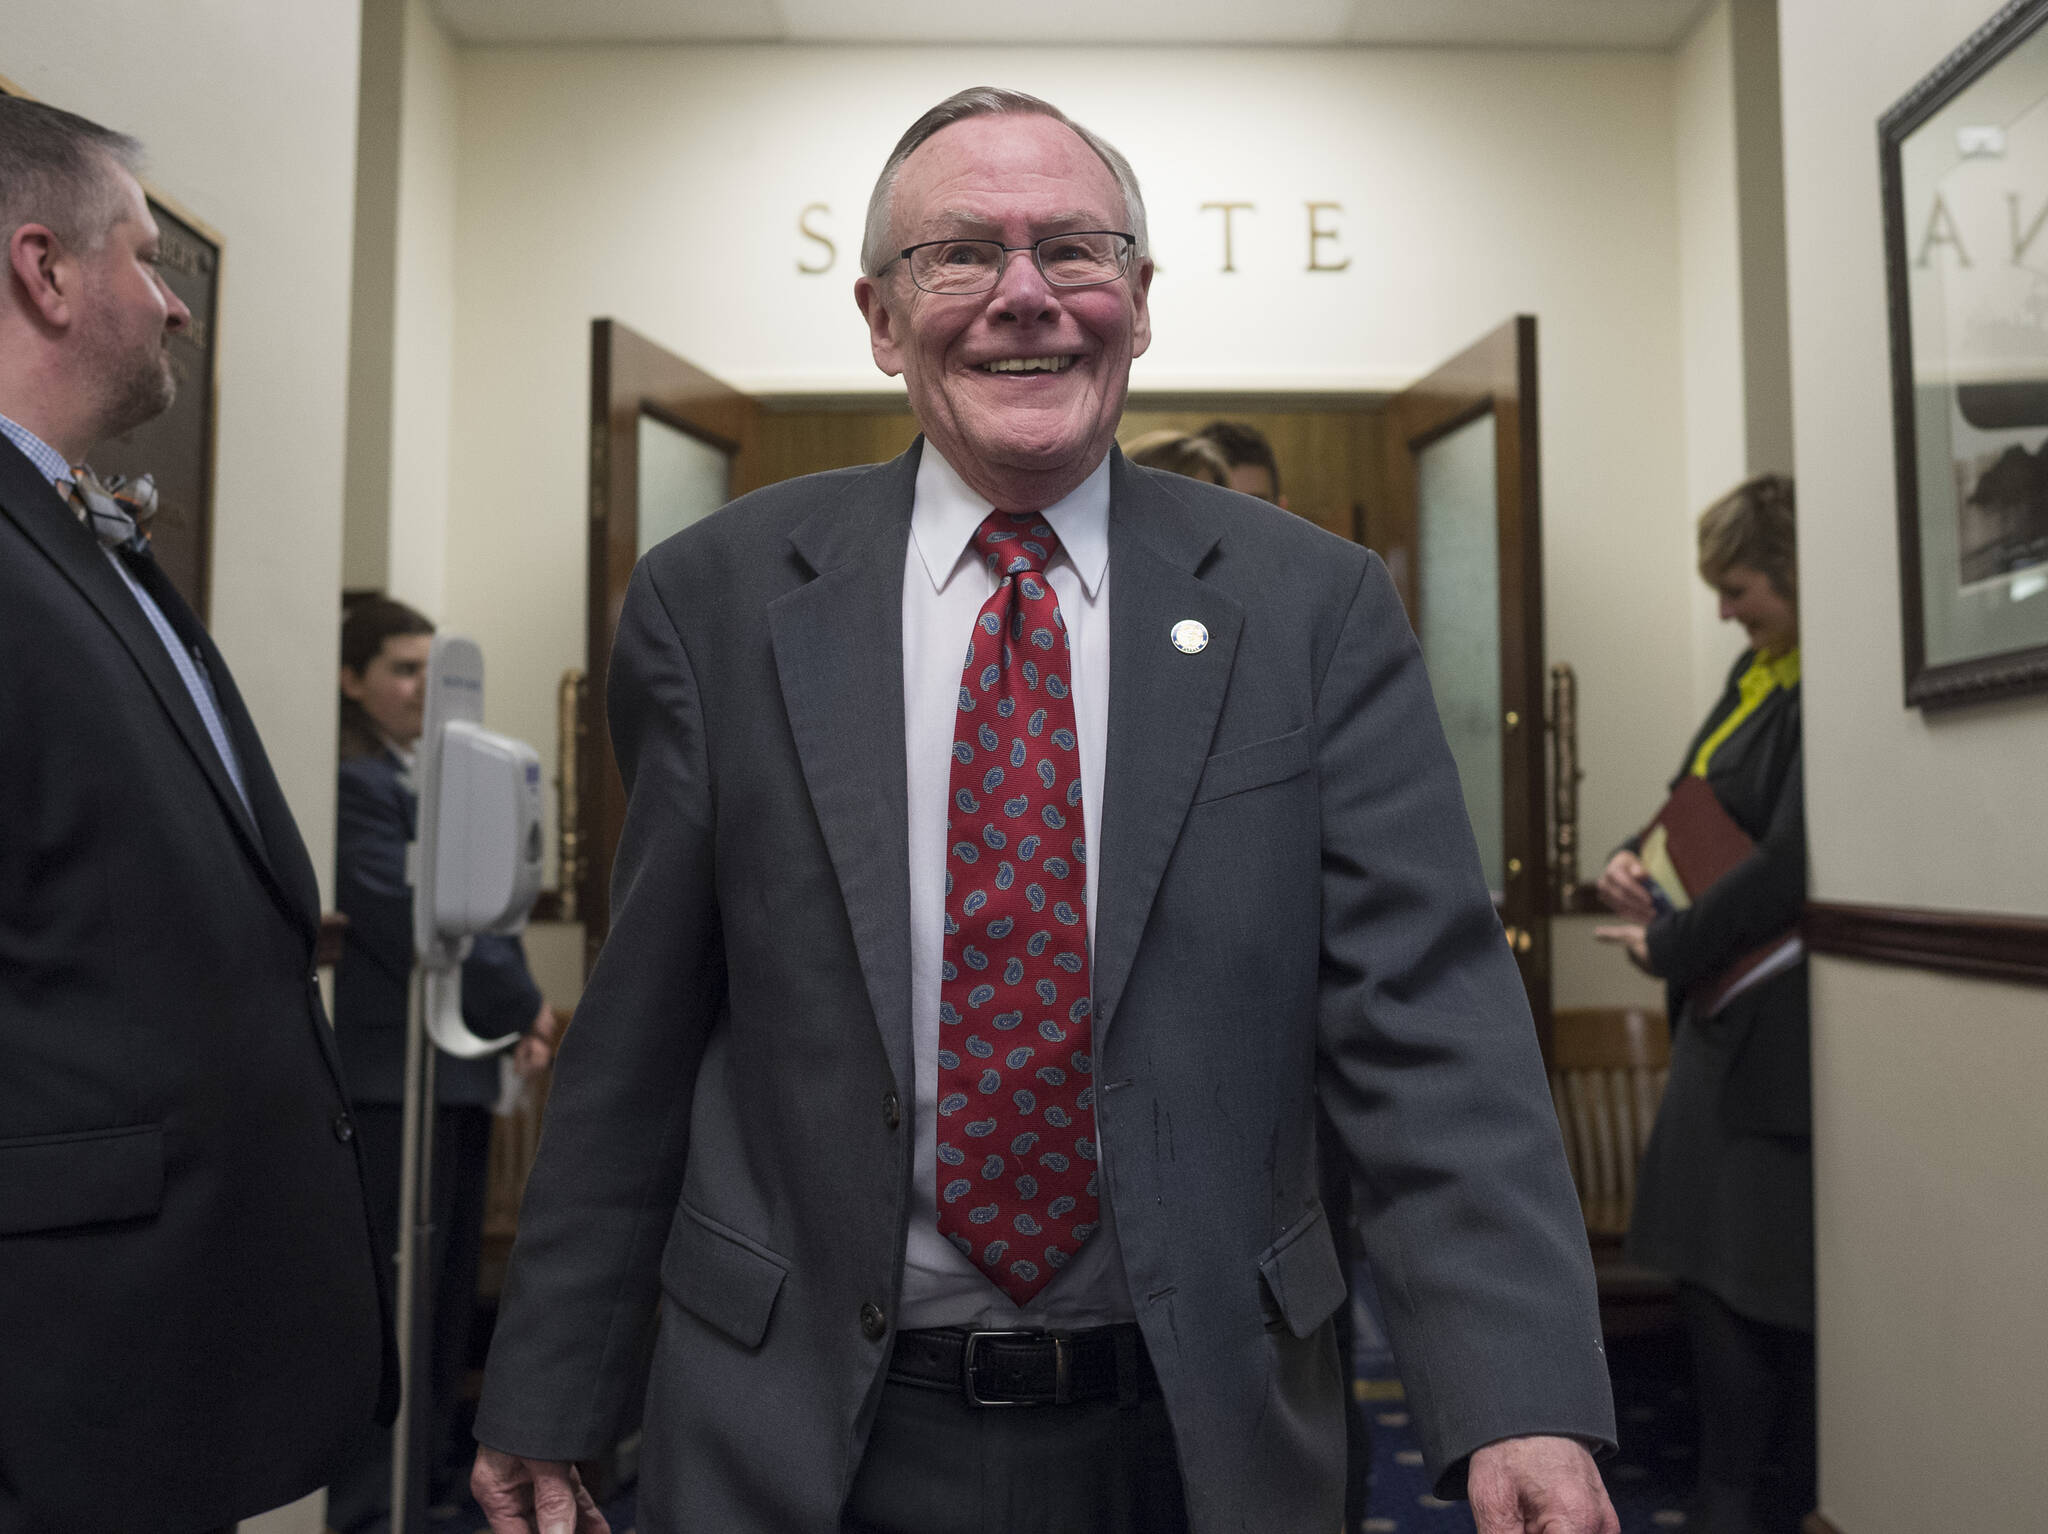 Michael Penn / Juneau Empire File
In this April 11, 2018 photo state Sen. Dennis Egan, D-Juneau, walks out of the Senate chambers and to a reception to honor him and Sen. Berta Gardner, D-Anchorage, at the Capitol. Both were retiring from the legislature.